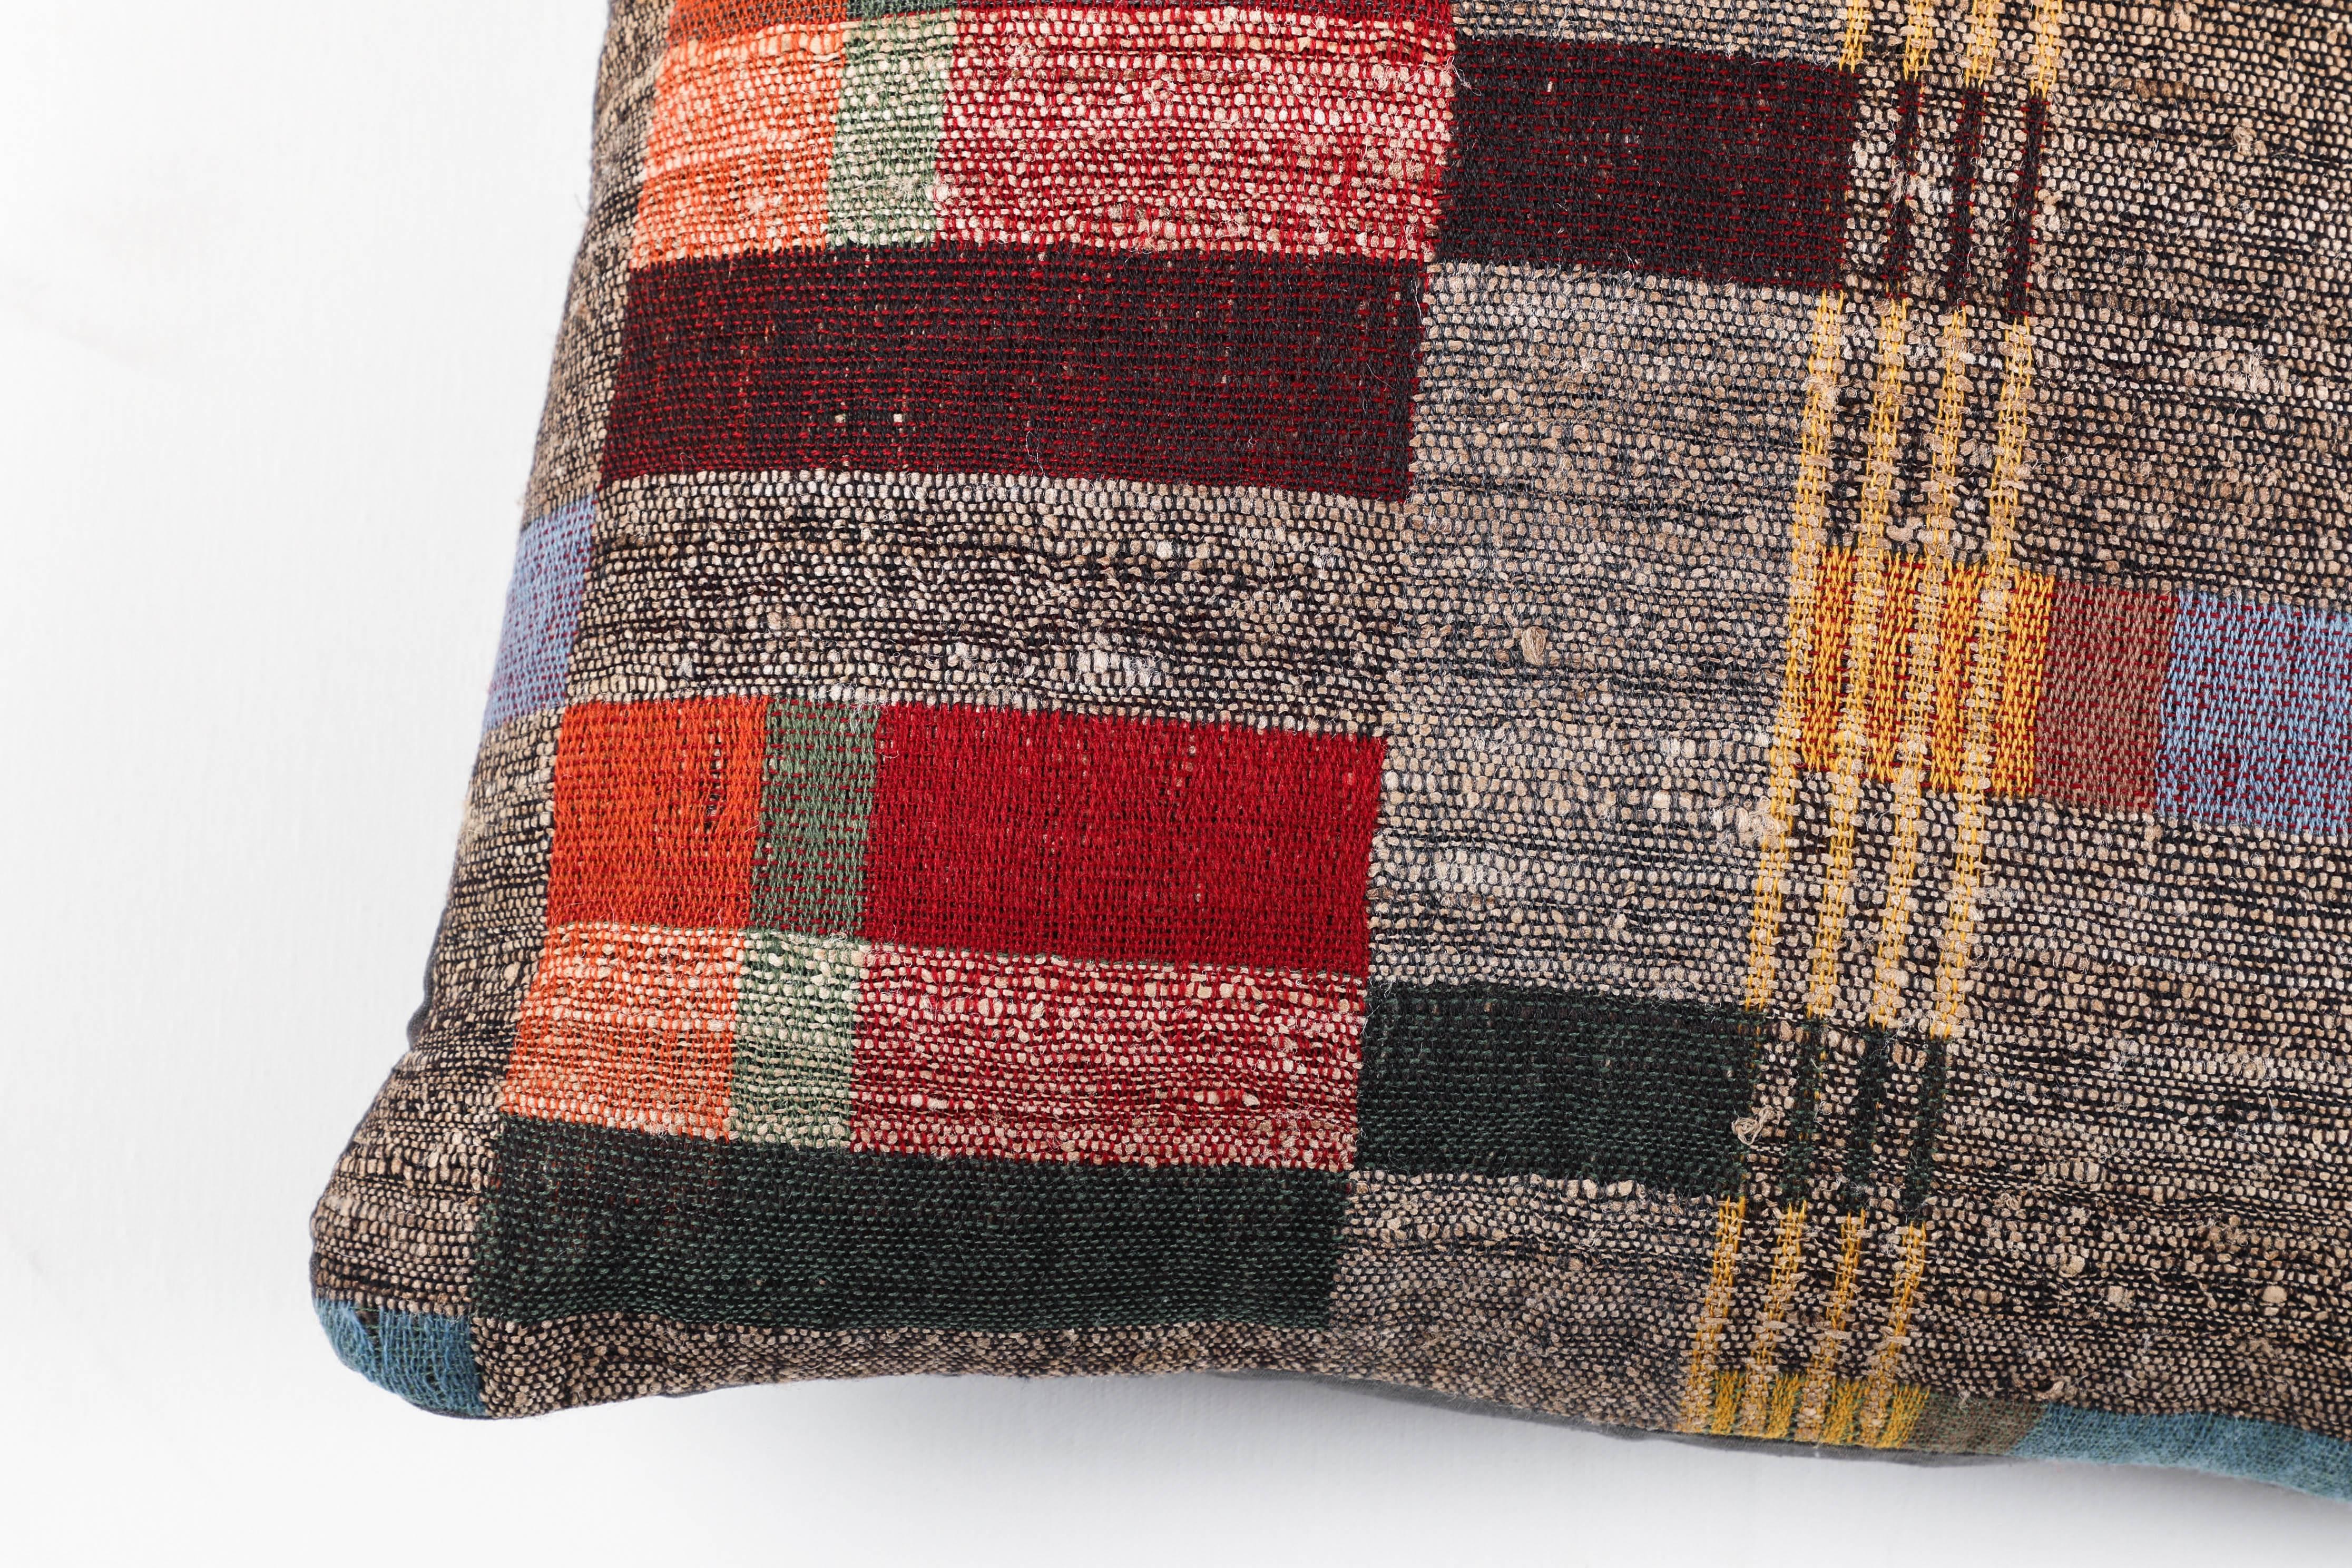 A contemporary line of cushions, pillows, throws, bedcovers, bedspreads and yardage handwoven in India on antique Jacquard looms. Hand-spun wool, cotton, linen and raw silk give the textiles an appealing uneven quality. Sizes vary slightly.

This